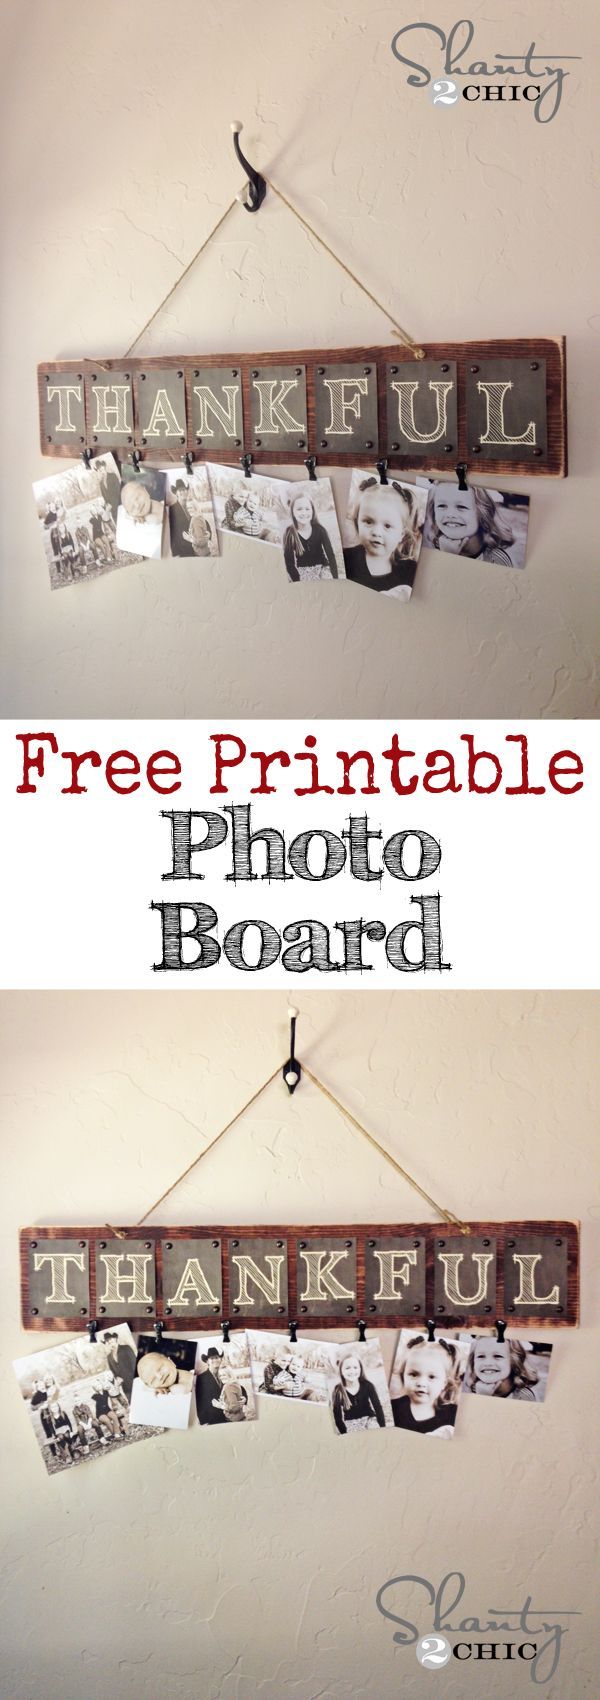 DIY Thankful Photo Board with FREE Printable letters... So sweet! LOVE it! Fun g...